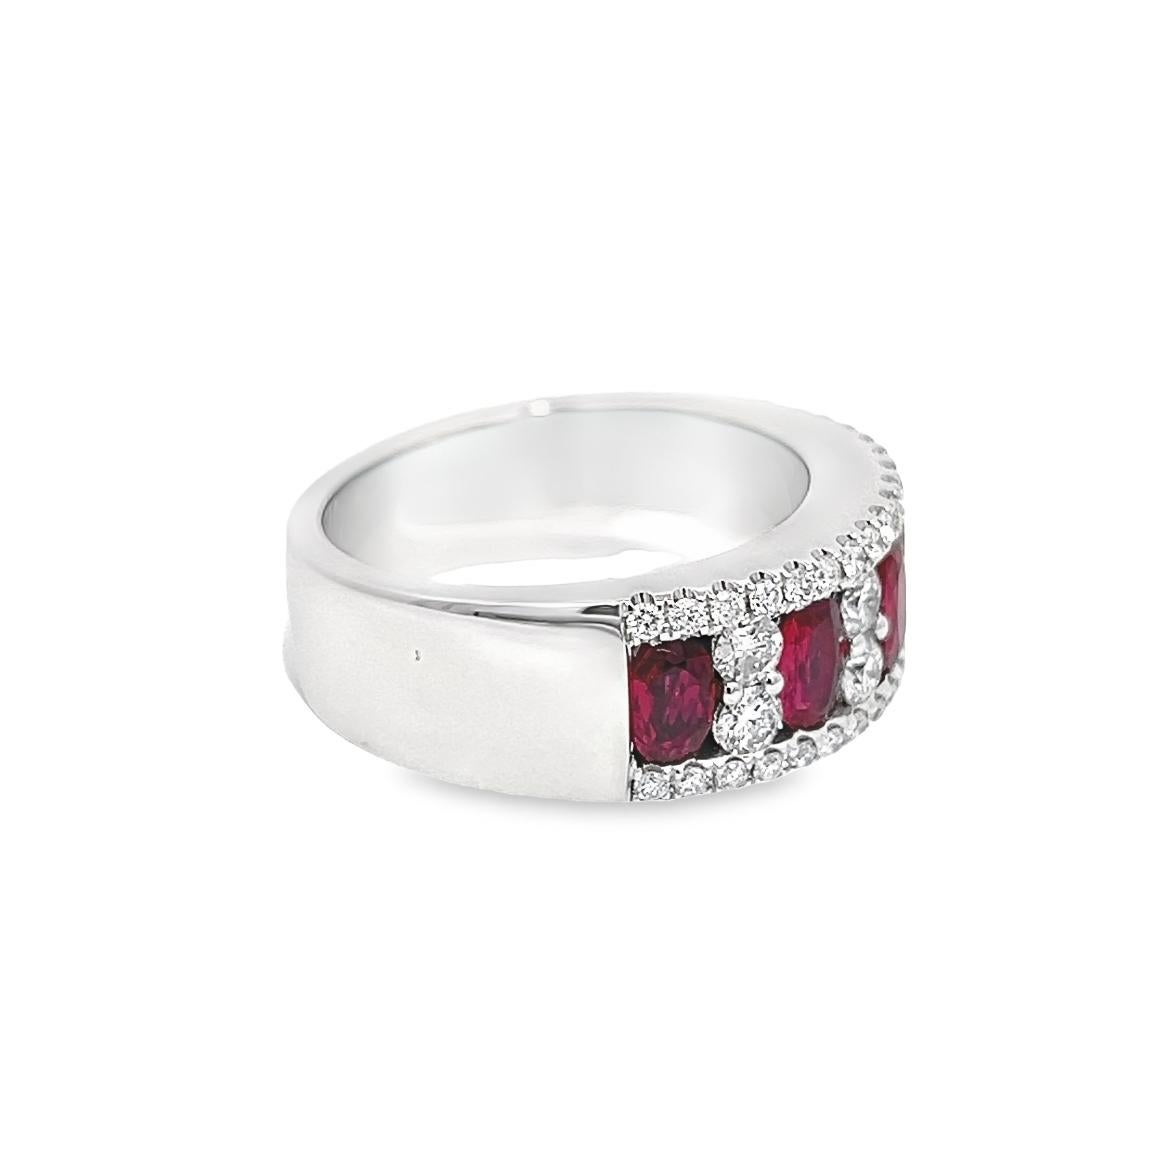 A captivating and colorful quintet of richly saturated, oval shaped vibrant raspberry-red rubies, together weighing 1.27 carat weight total, are interspersed by bright white and sparkling round cut diamonds, in this Victorian inspired band ring hand